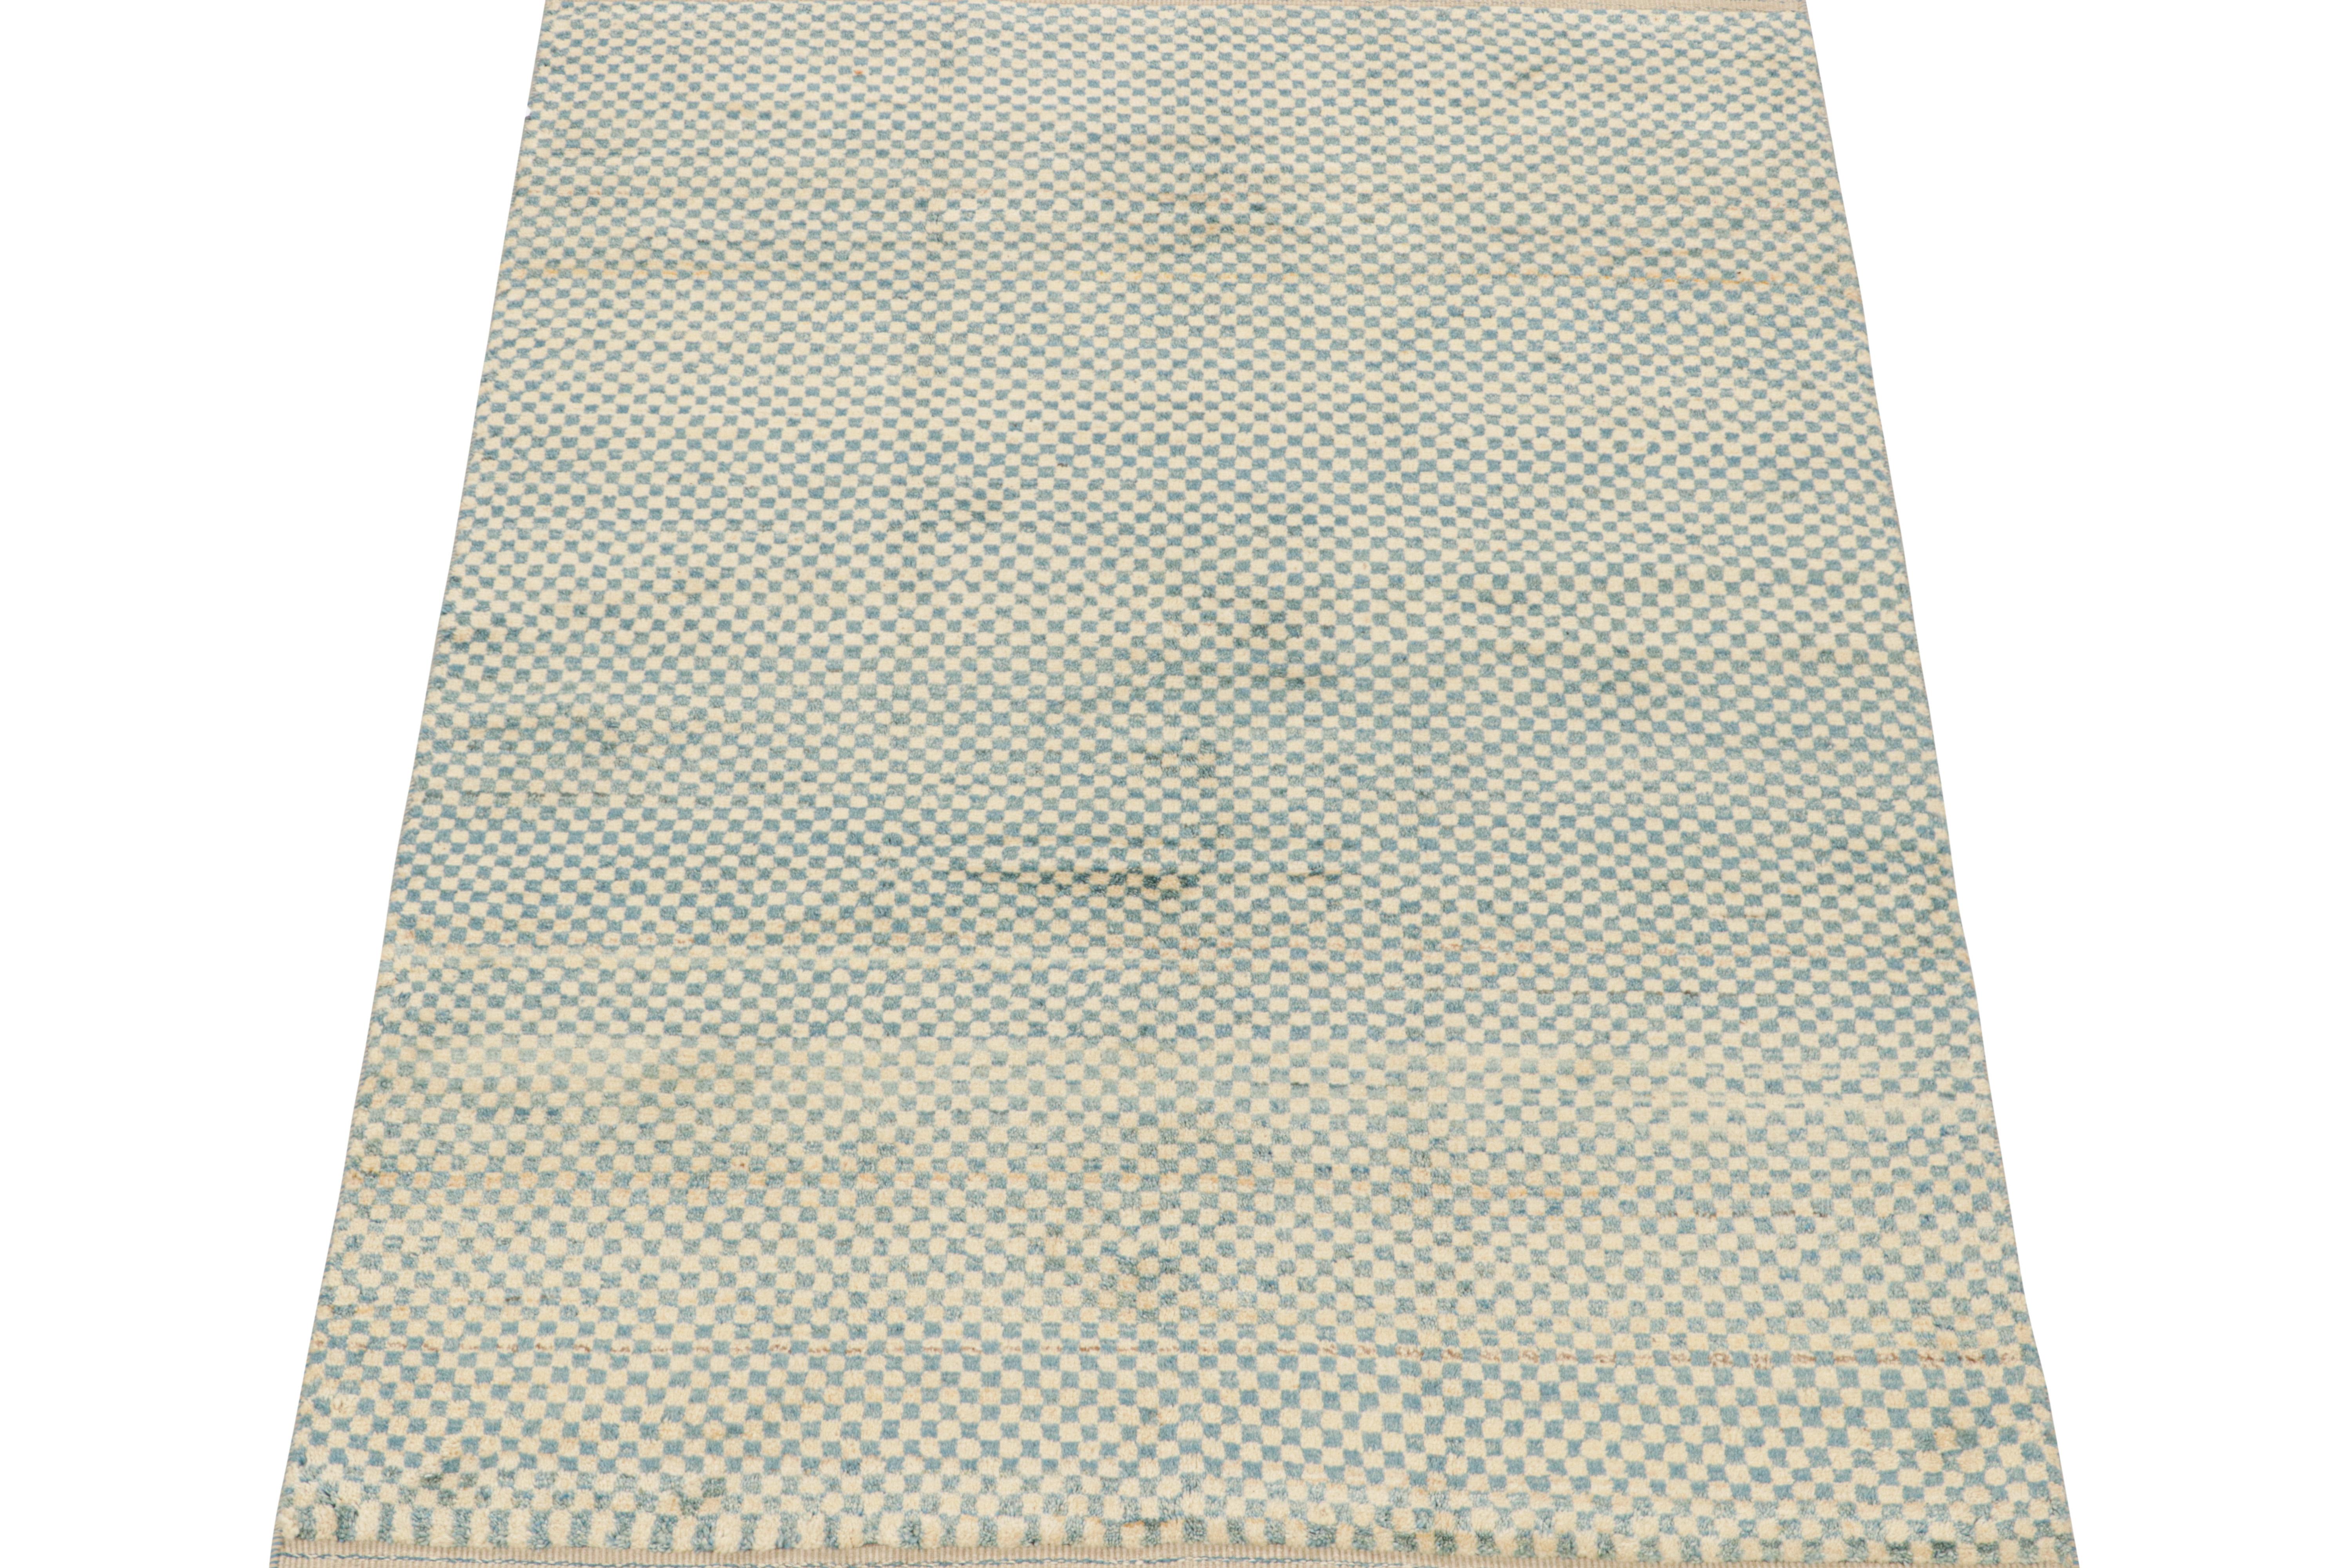 This contemporary 5x8 rug is an exciting new addition to the Modern Classics Collection by Rug & Kilim. 

Its design reflects a take on Gabbeh rugs by a modern Persian atelier with vast experience curating this style. This particular design enjoys